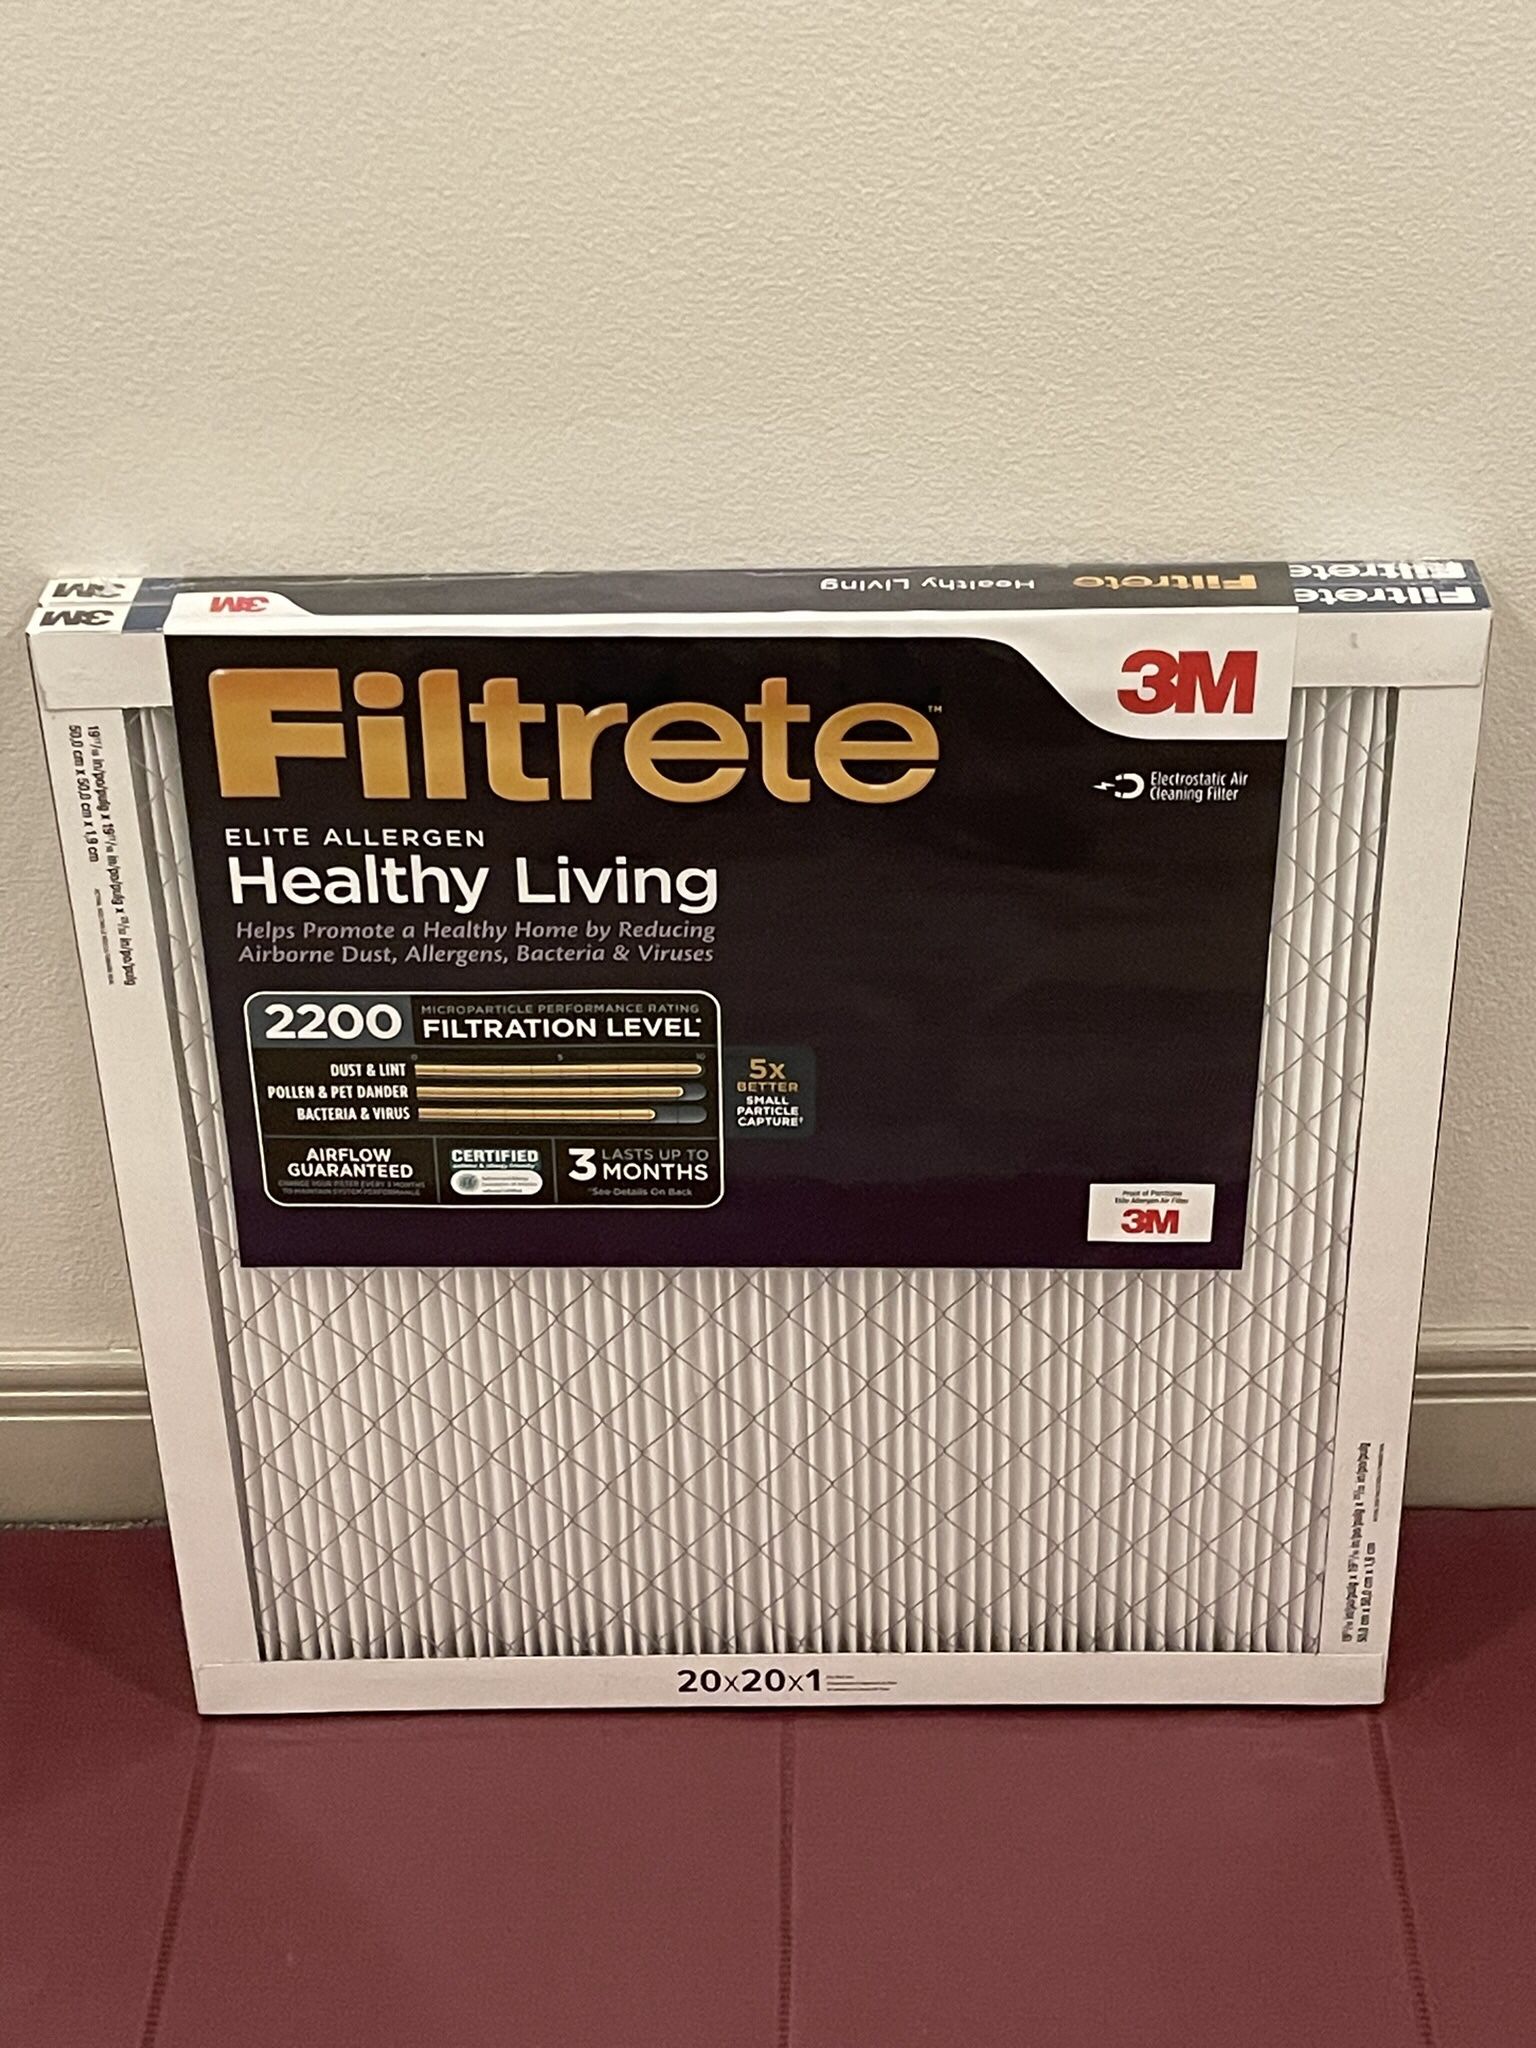 NEW!! 2-Pk. FILTRETE 2200 Filtration Level HVAC FILTERS (20" x 20" x 1") - firm price